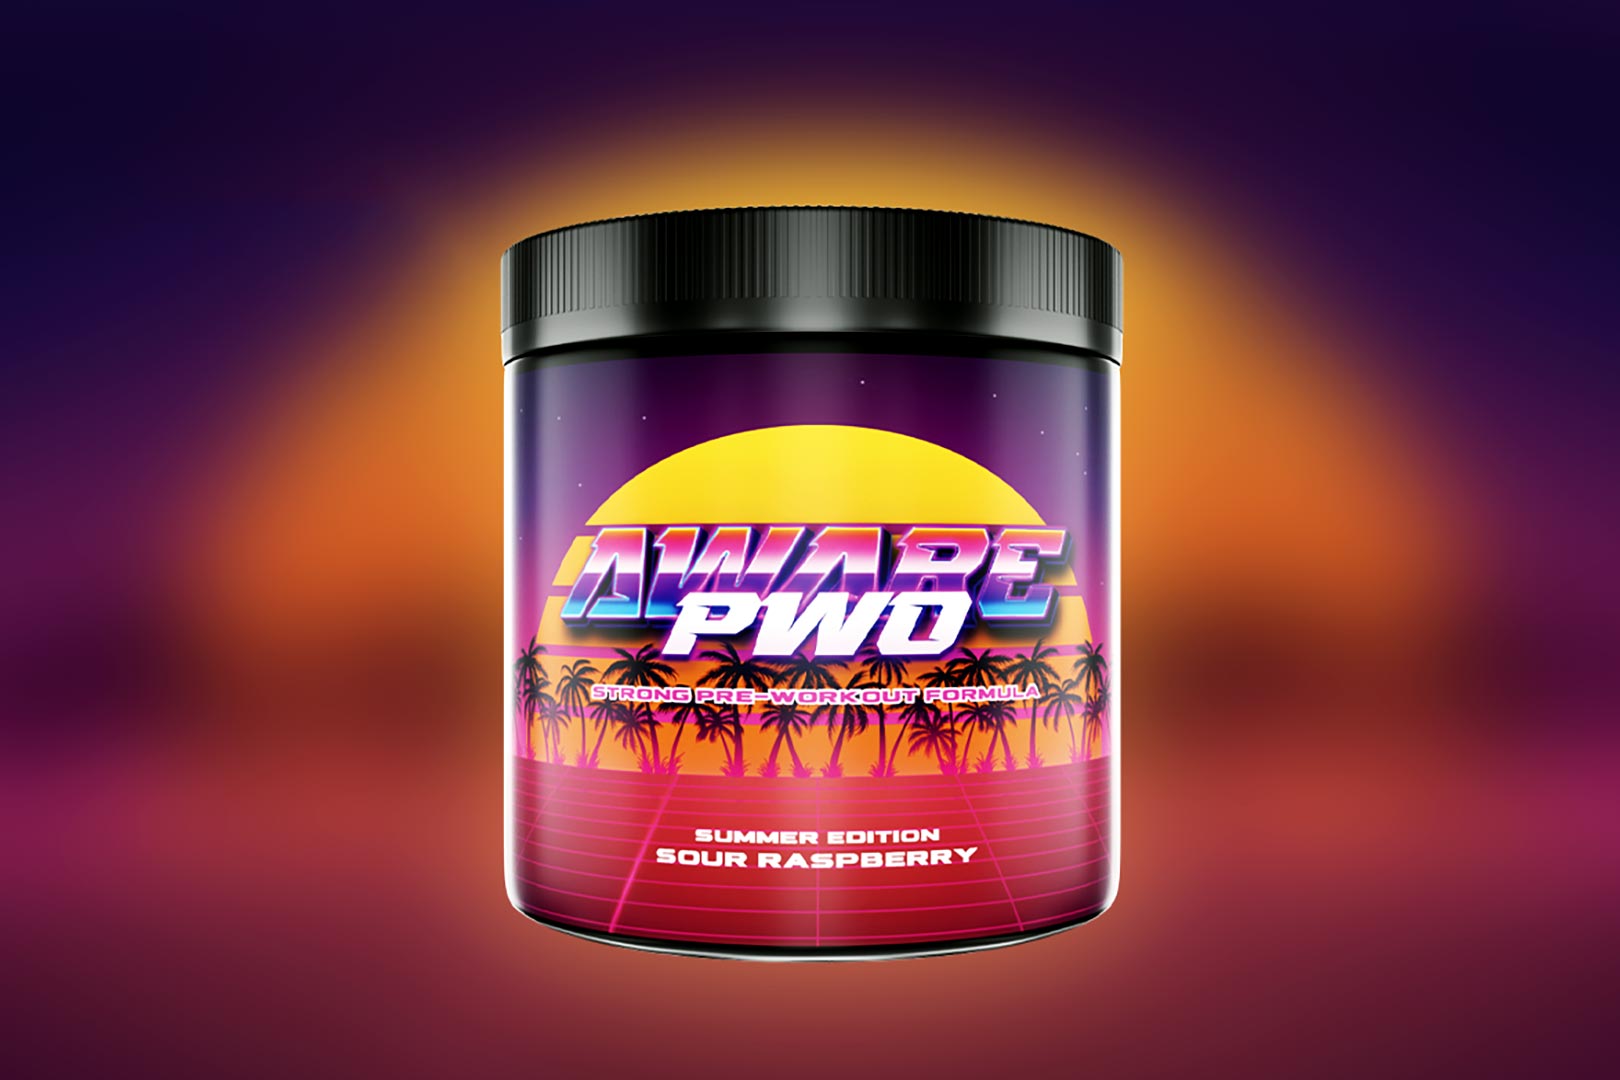 Summer Edition Sour Raspberry Aware Pwo